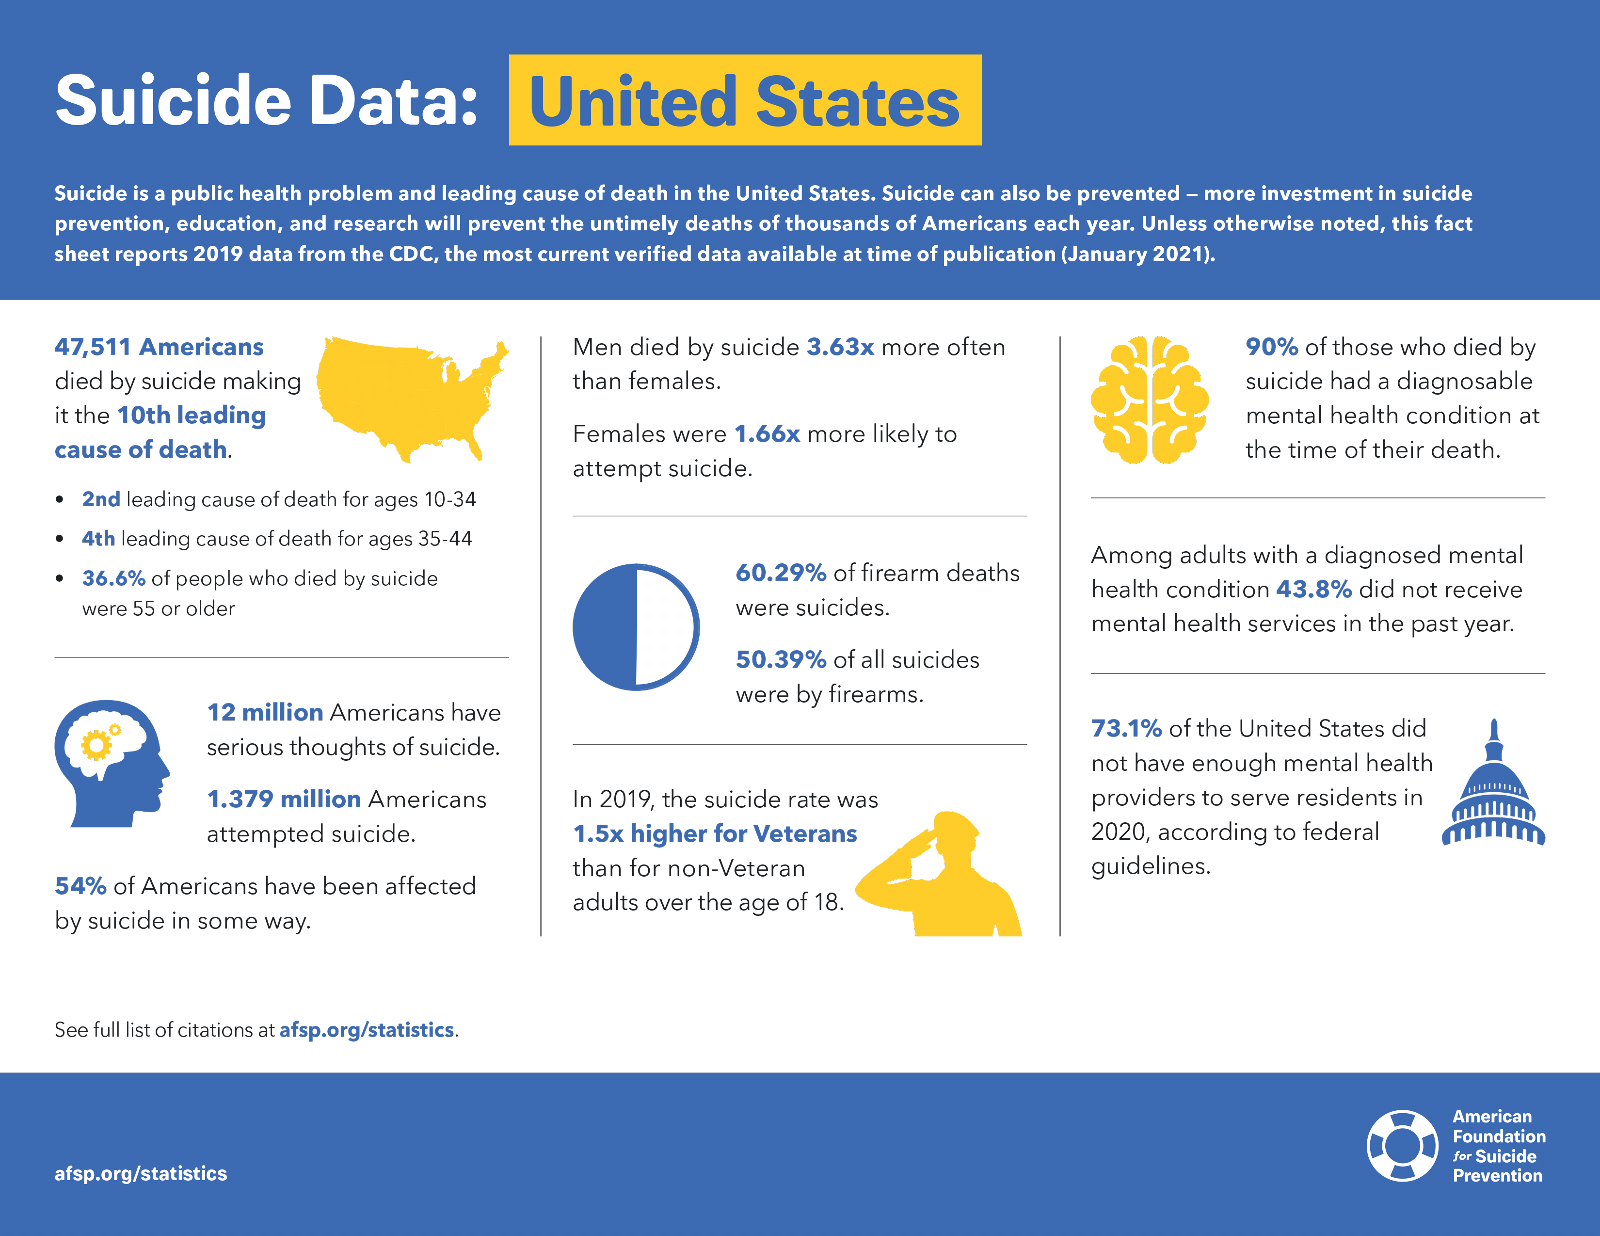 National Suicide Data 2019